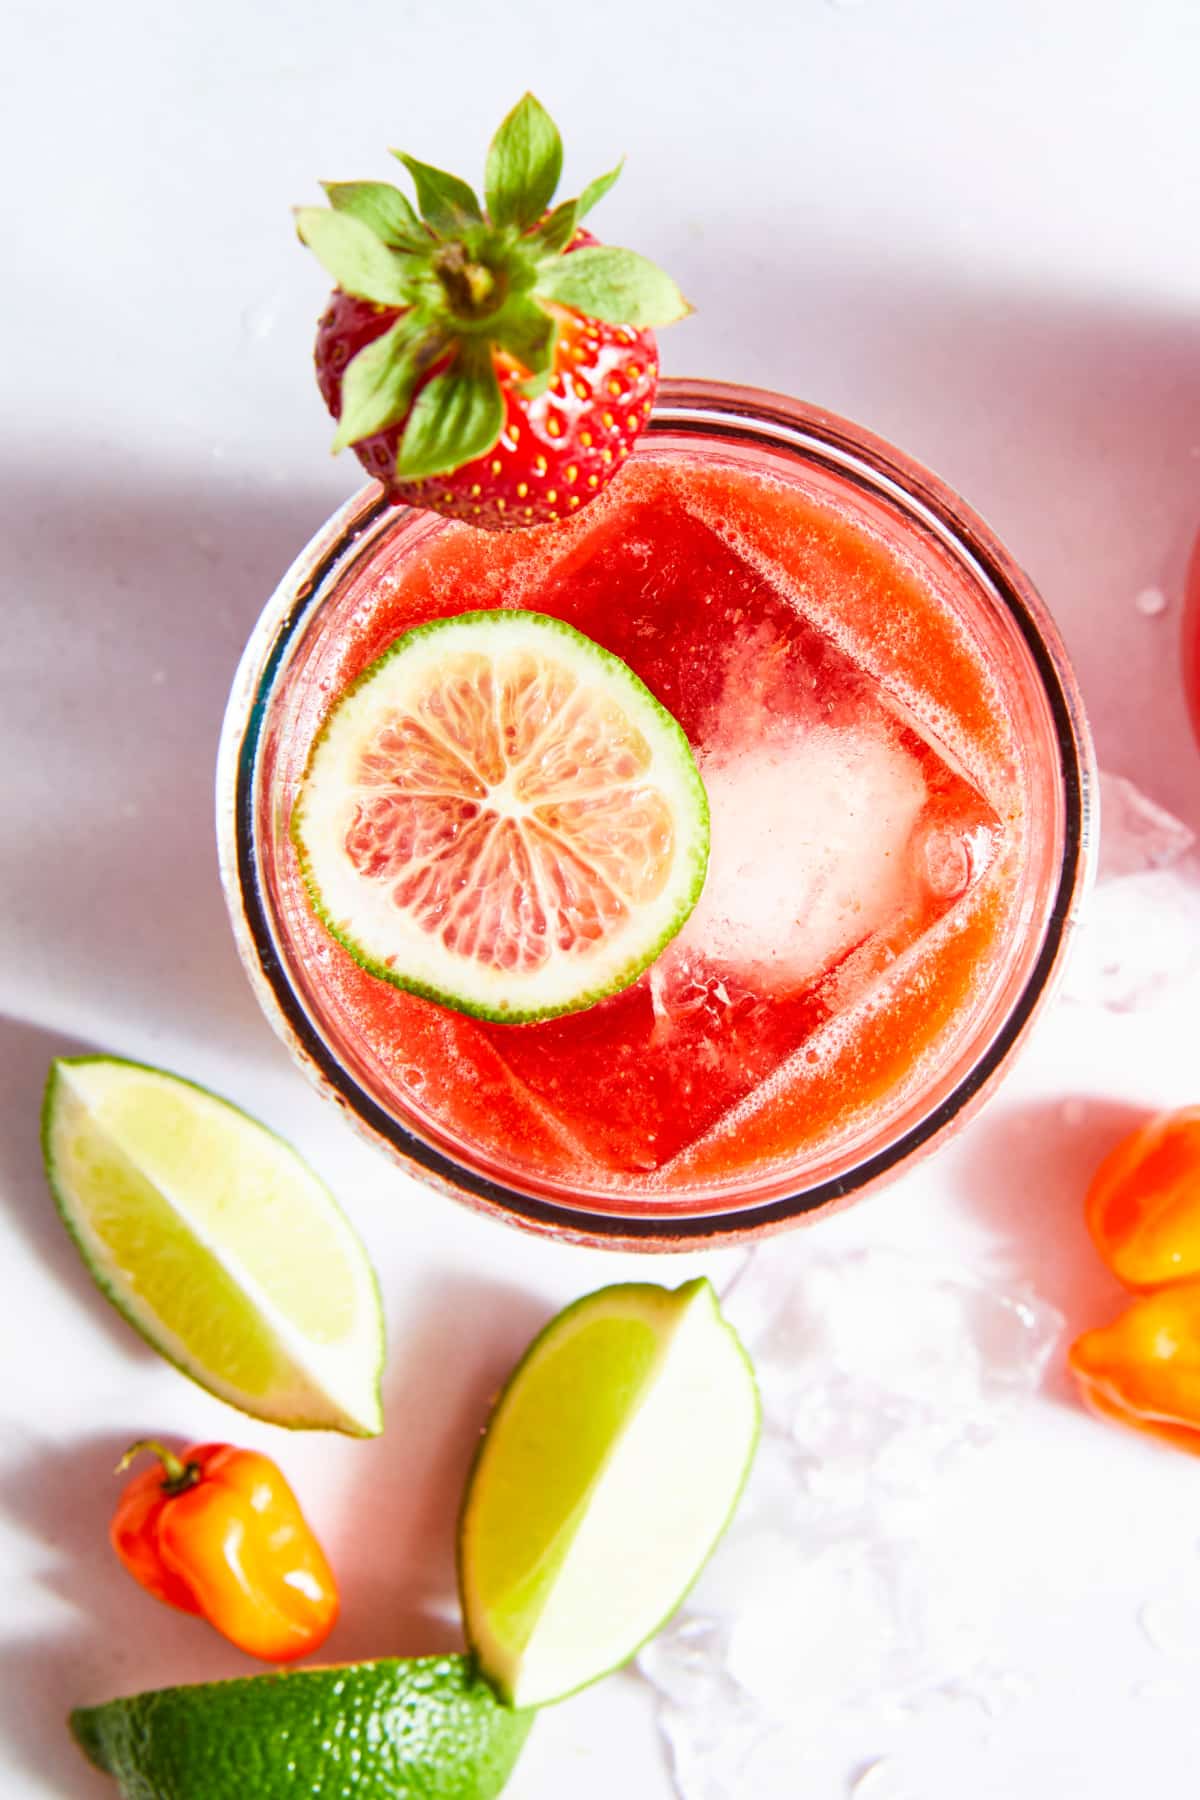 Overhead view of a spicy strawberry habanero margarita. The glass is garnished with a strawberry and surrounded by ice, habanero peppers and lime slices.